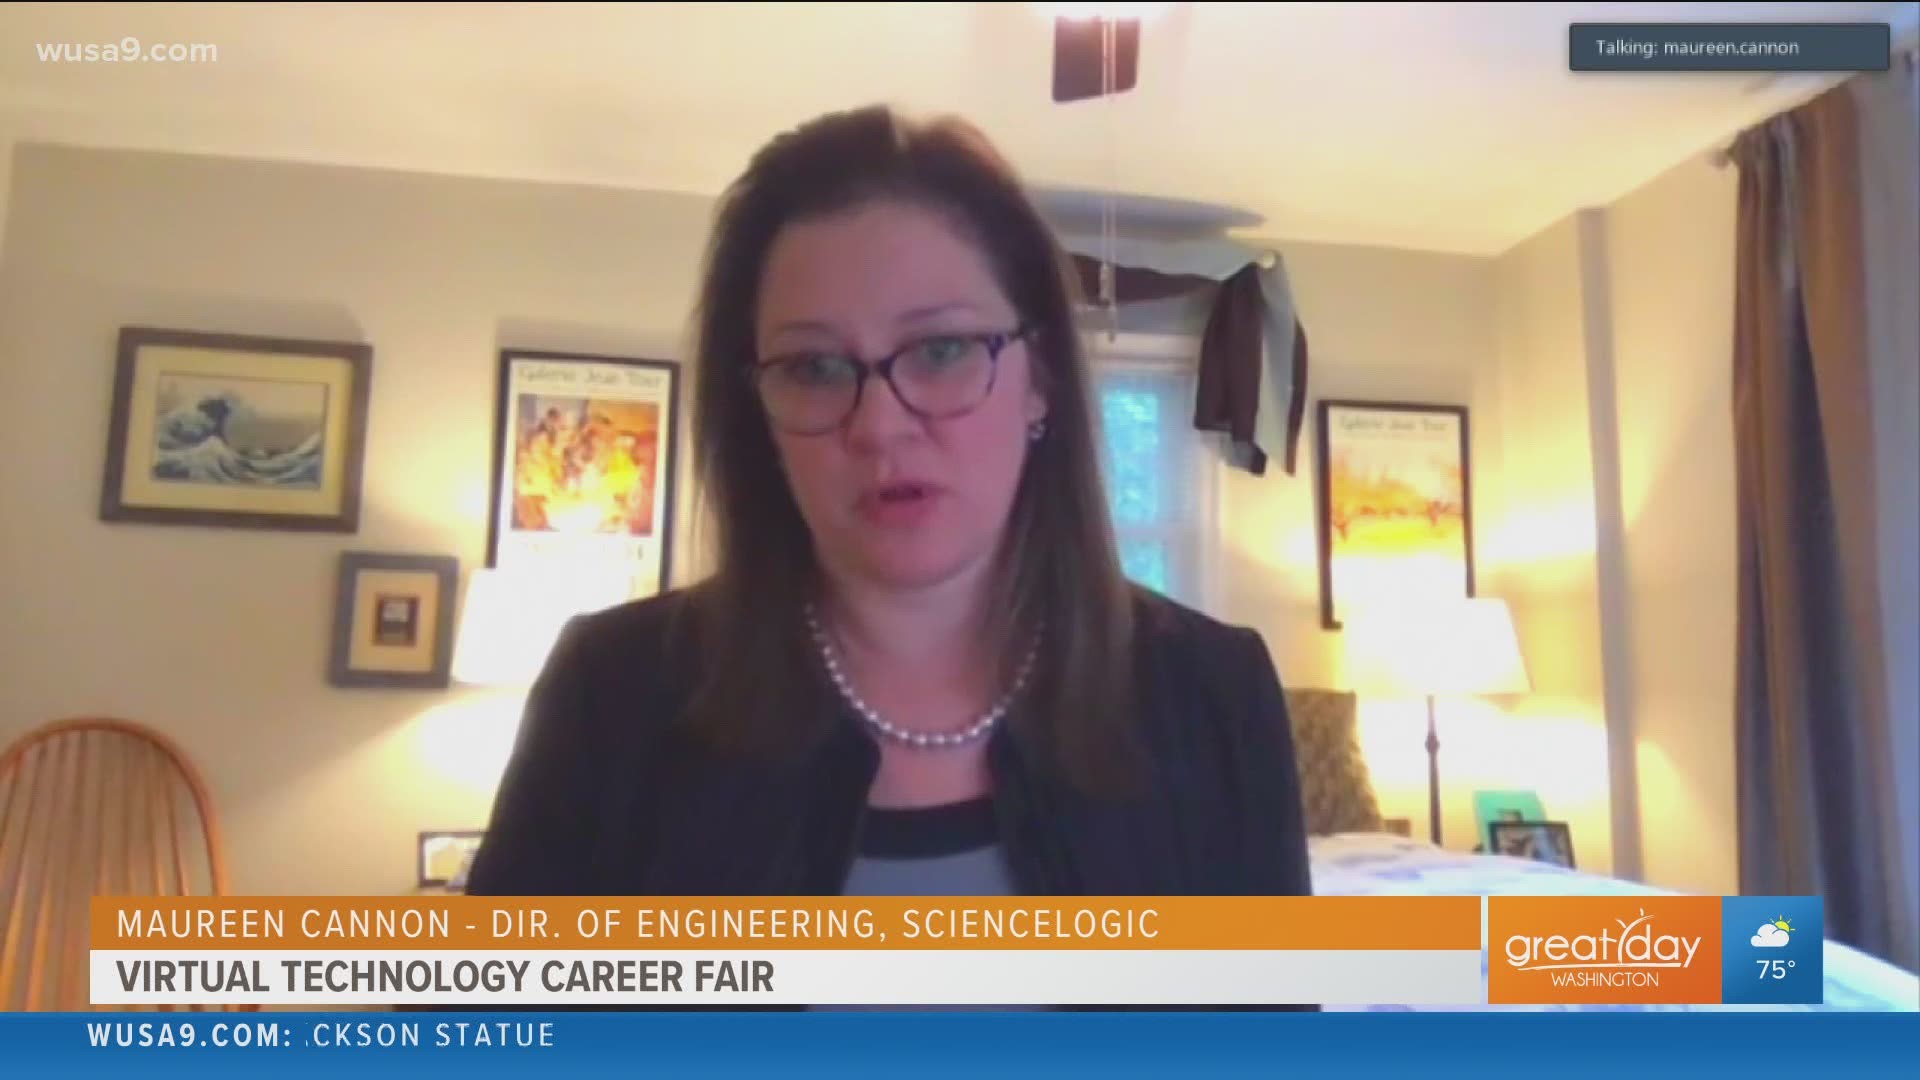 Kristen talks to Maureen Cannon of Women in Technology to see how they are planning their next job fair in a virtual way.